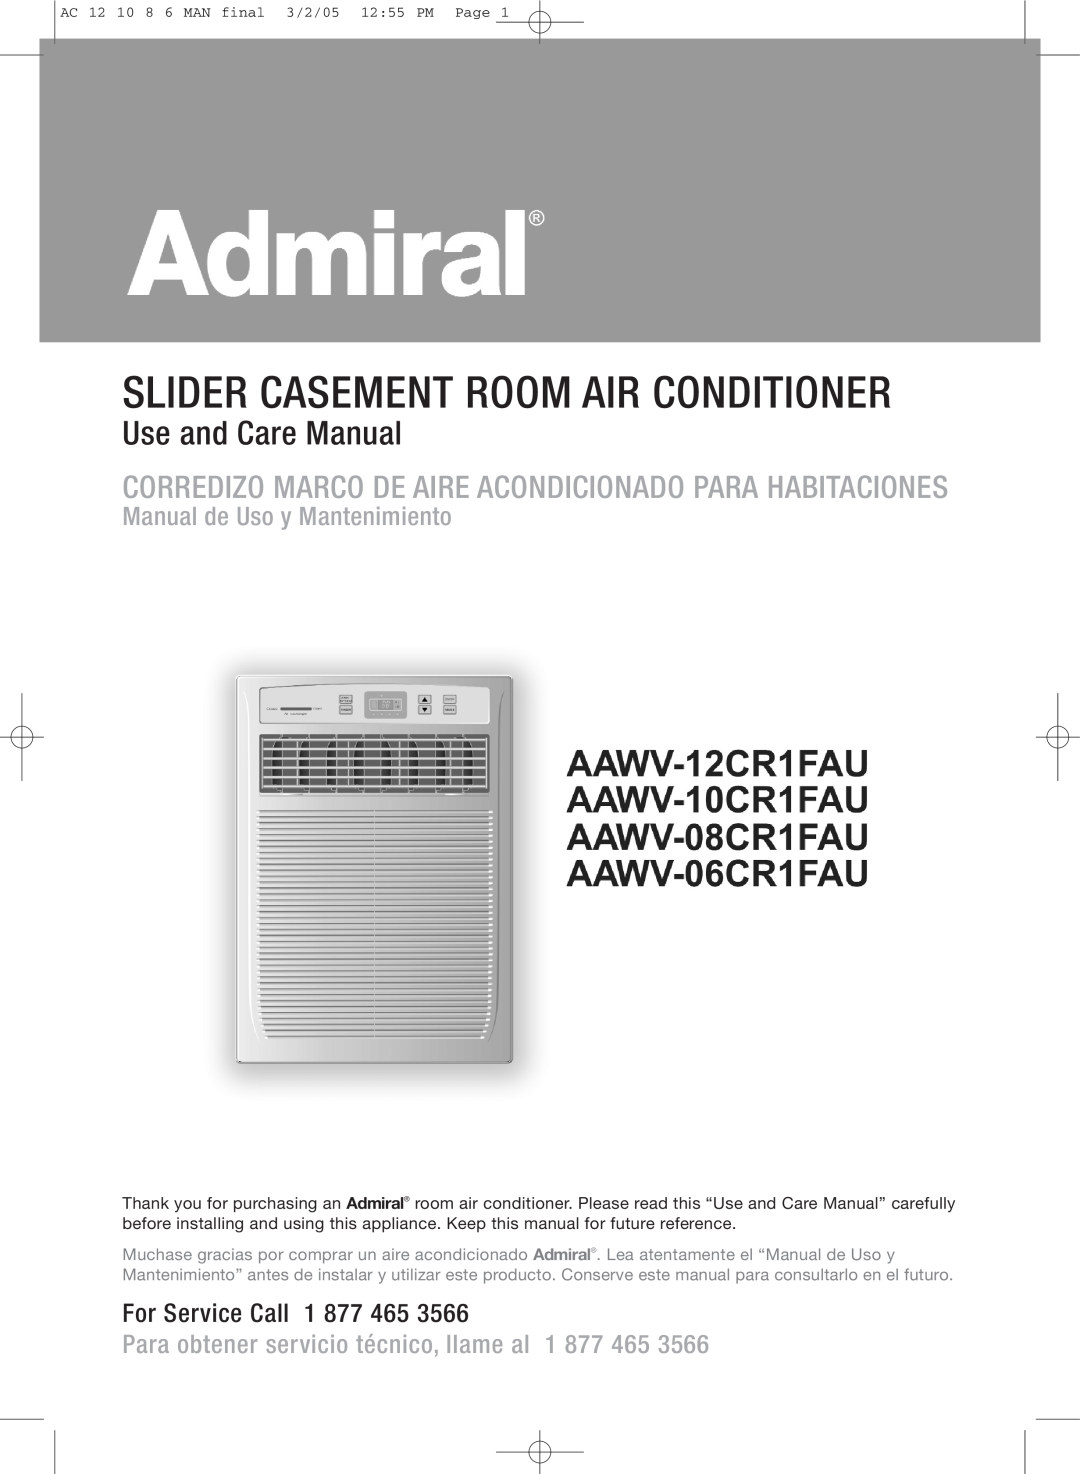 Admiral AAWV-06CR1FAU manual Slider Casement Room Air Conditioner, Use and Care Manual, Manual de Uso y Mantenimiento 